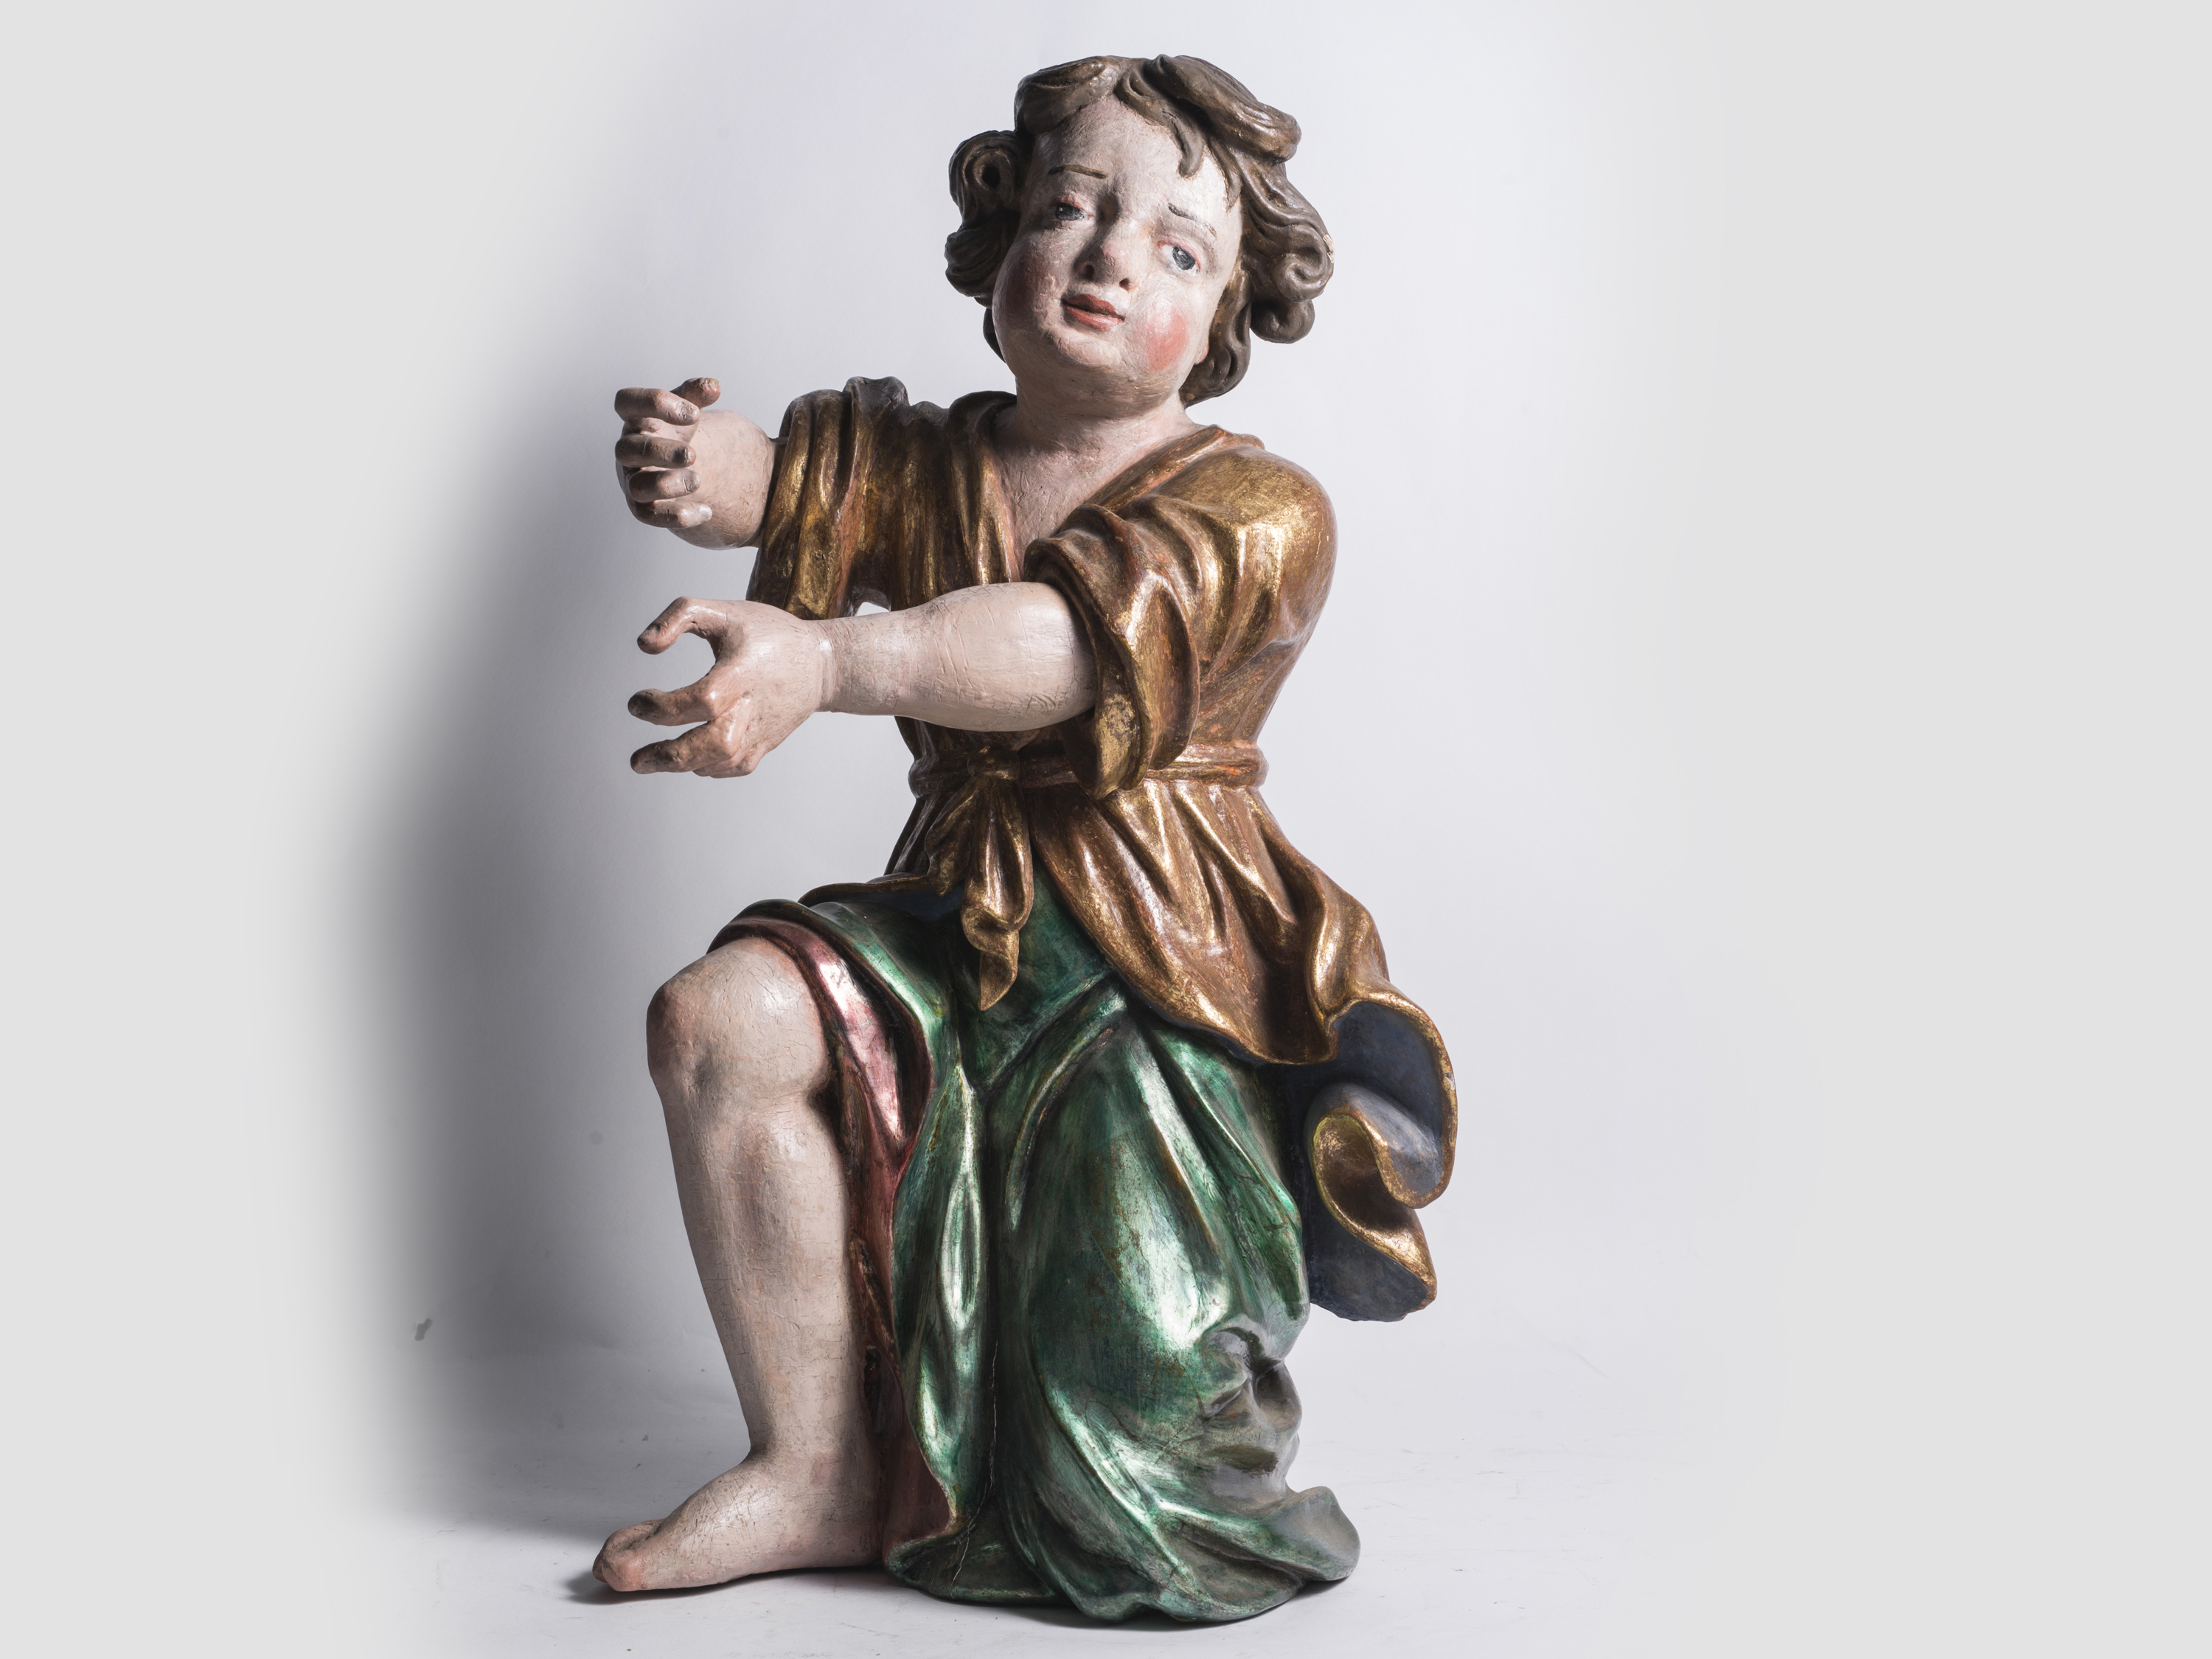 Pair of sconce angels, South German, Baroque, 17th/18th century - Image 3 of 9